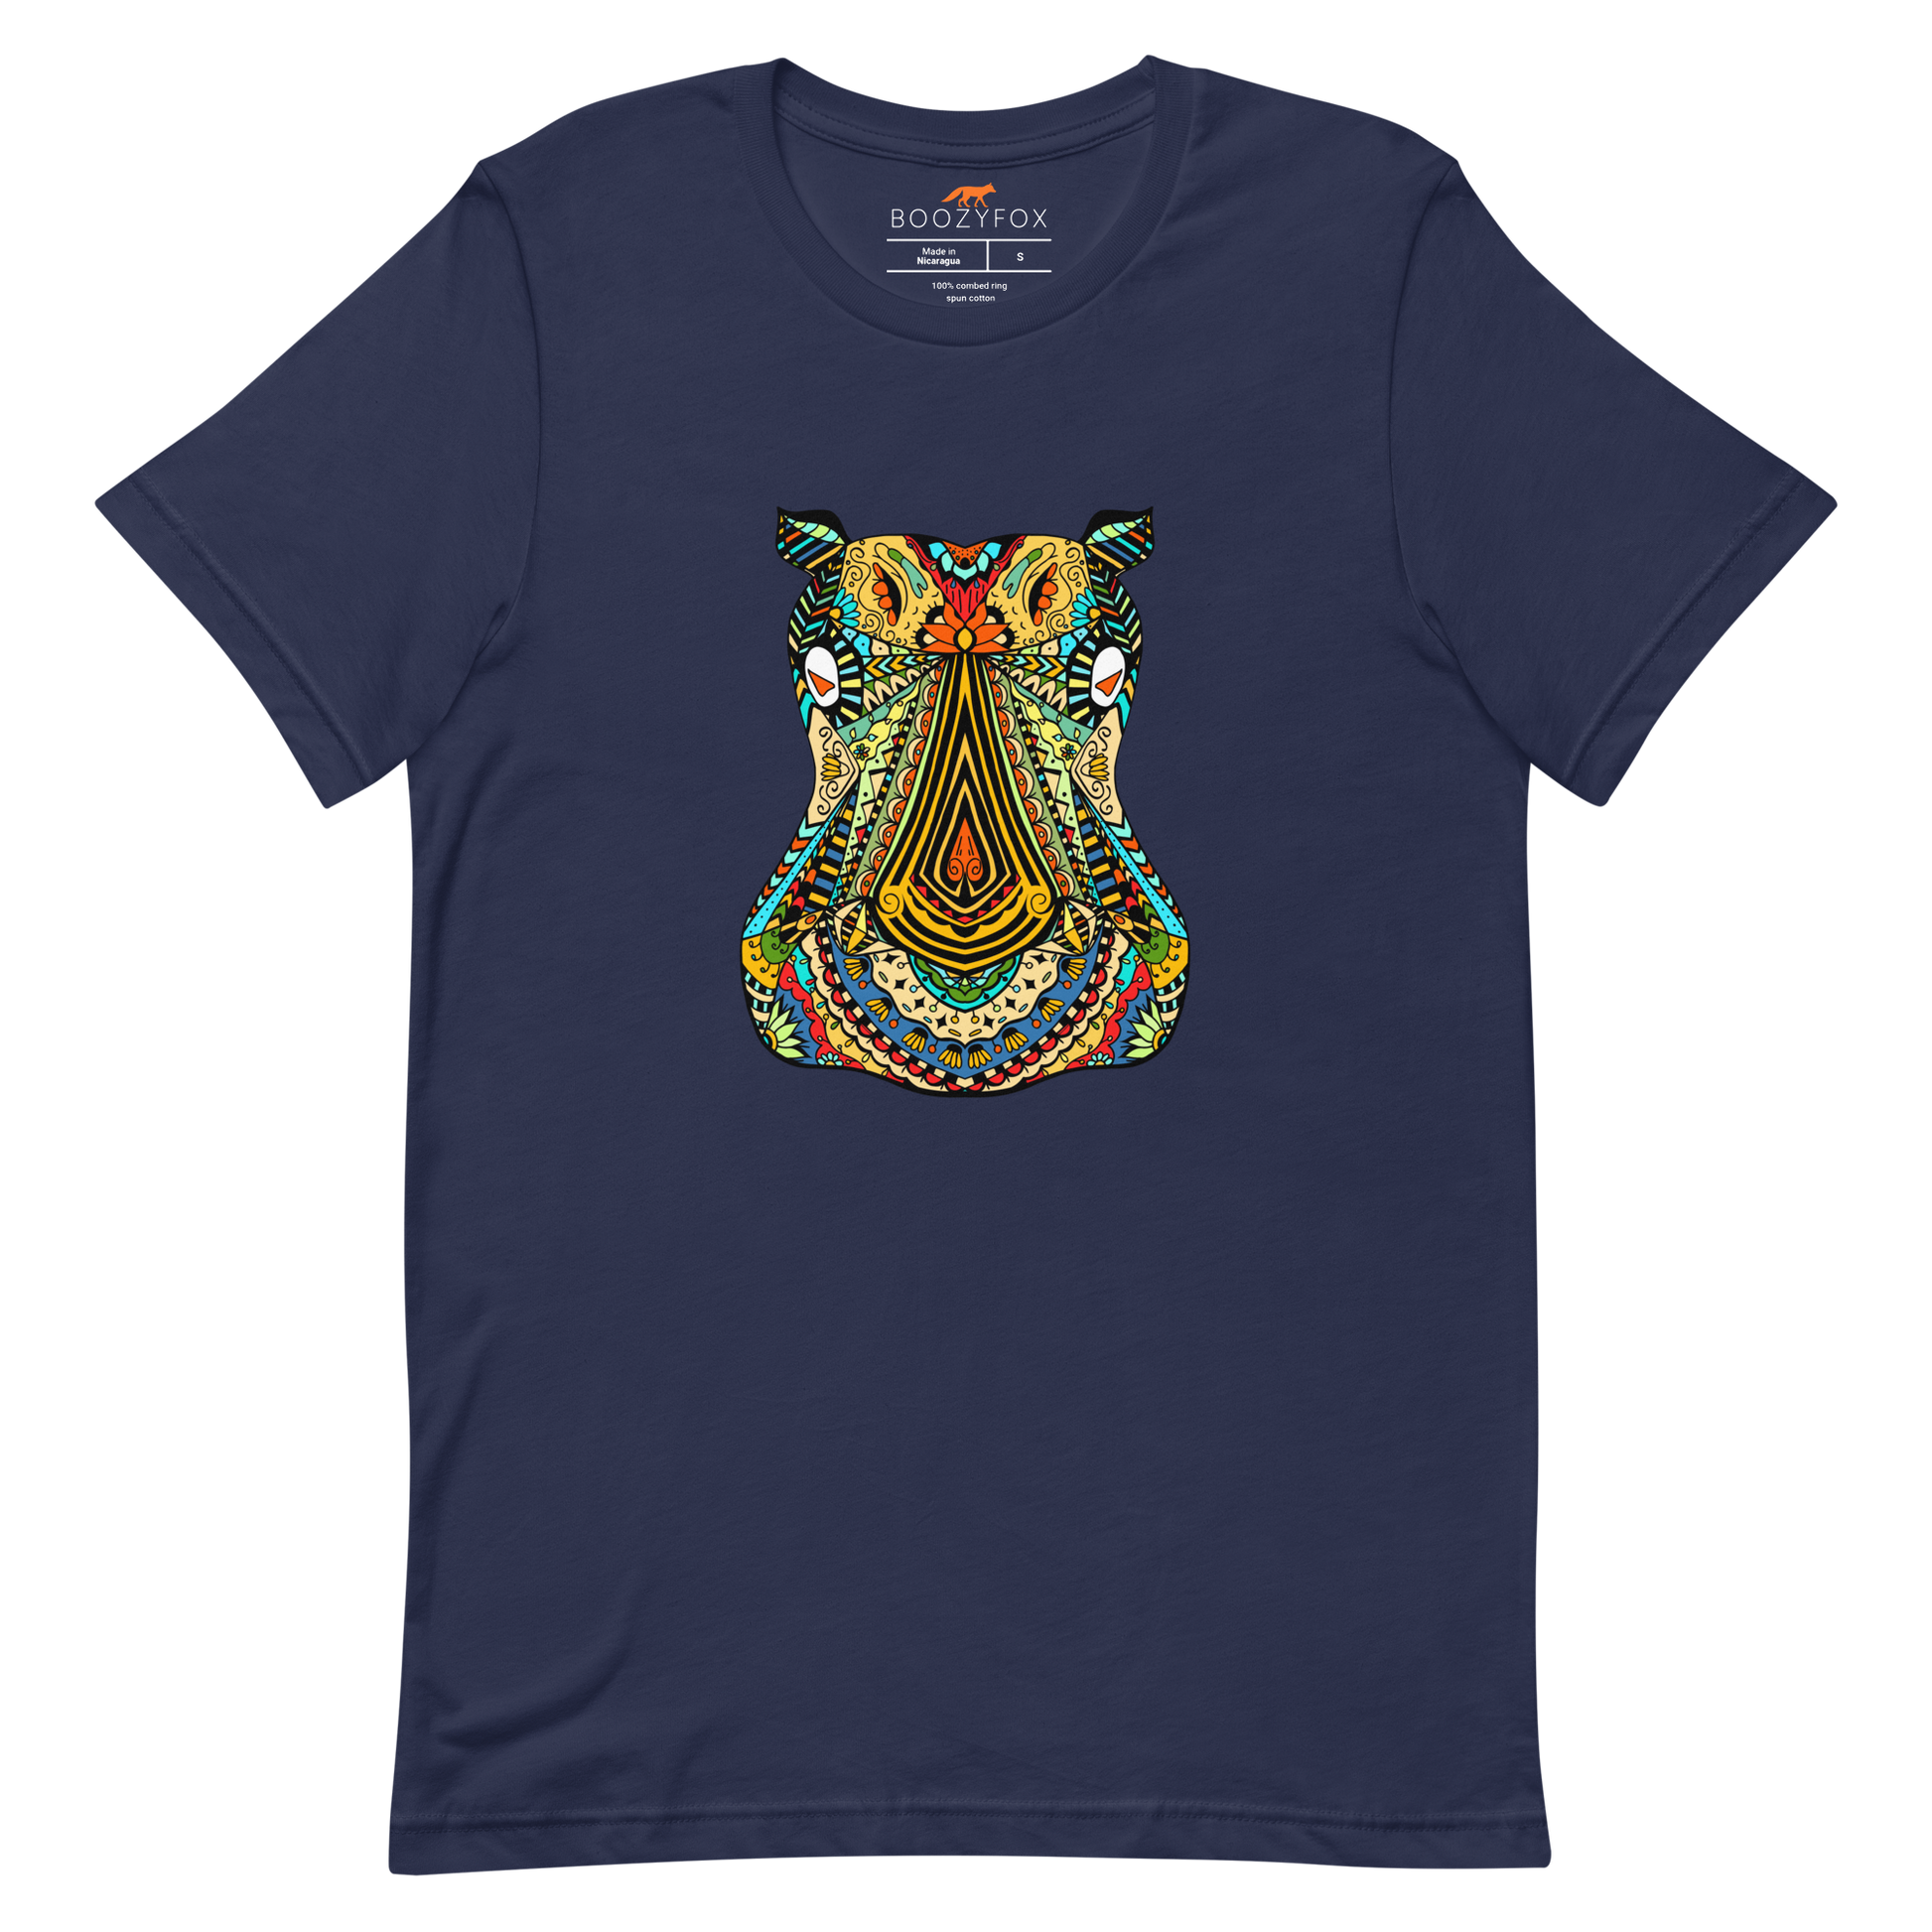 Navy Premium Hippo T-Shirt featuring a mesmerizing Zentangle Hippo graphic on the chest - Cool Graphic Hippo Tees - Boozy Fox